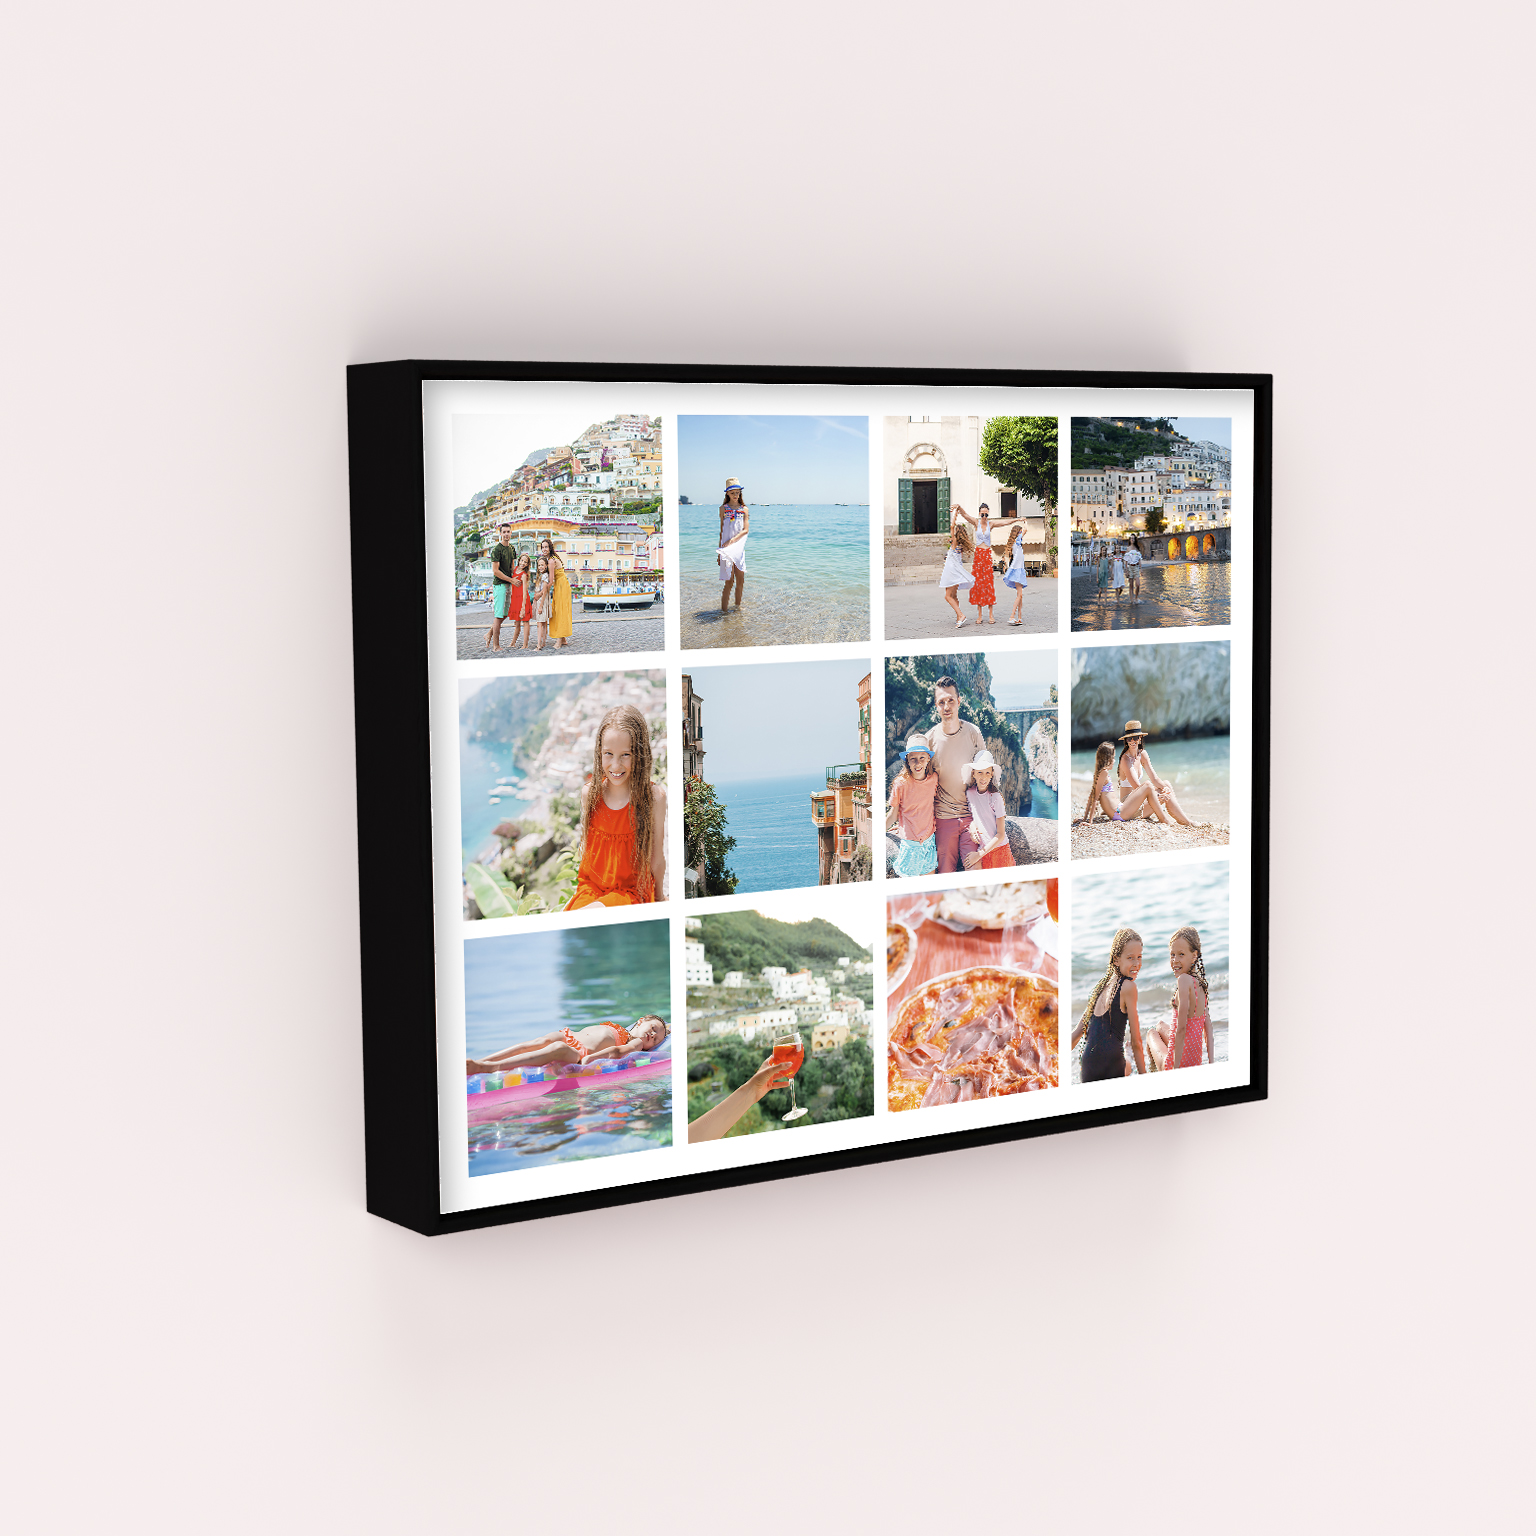 Boxed Photo Prints featuring Massive Montage design - Curate a unique collage and cherish memories with this framed canvas